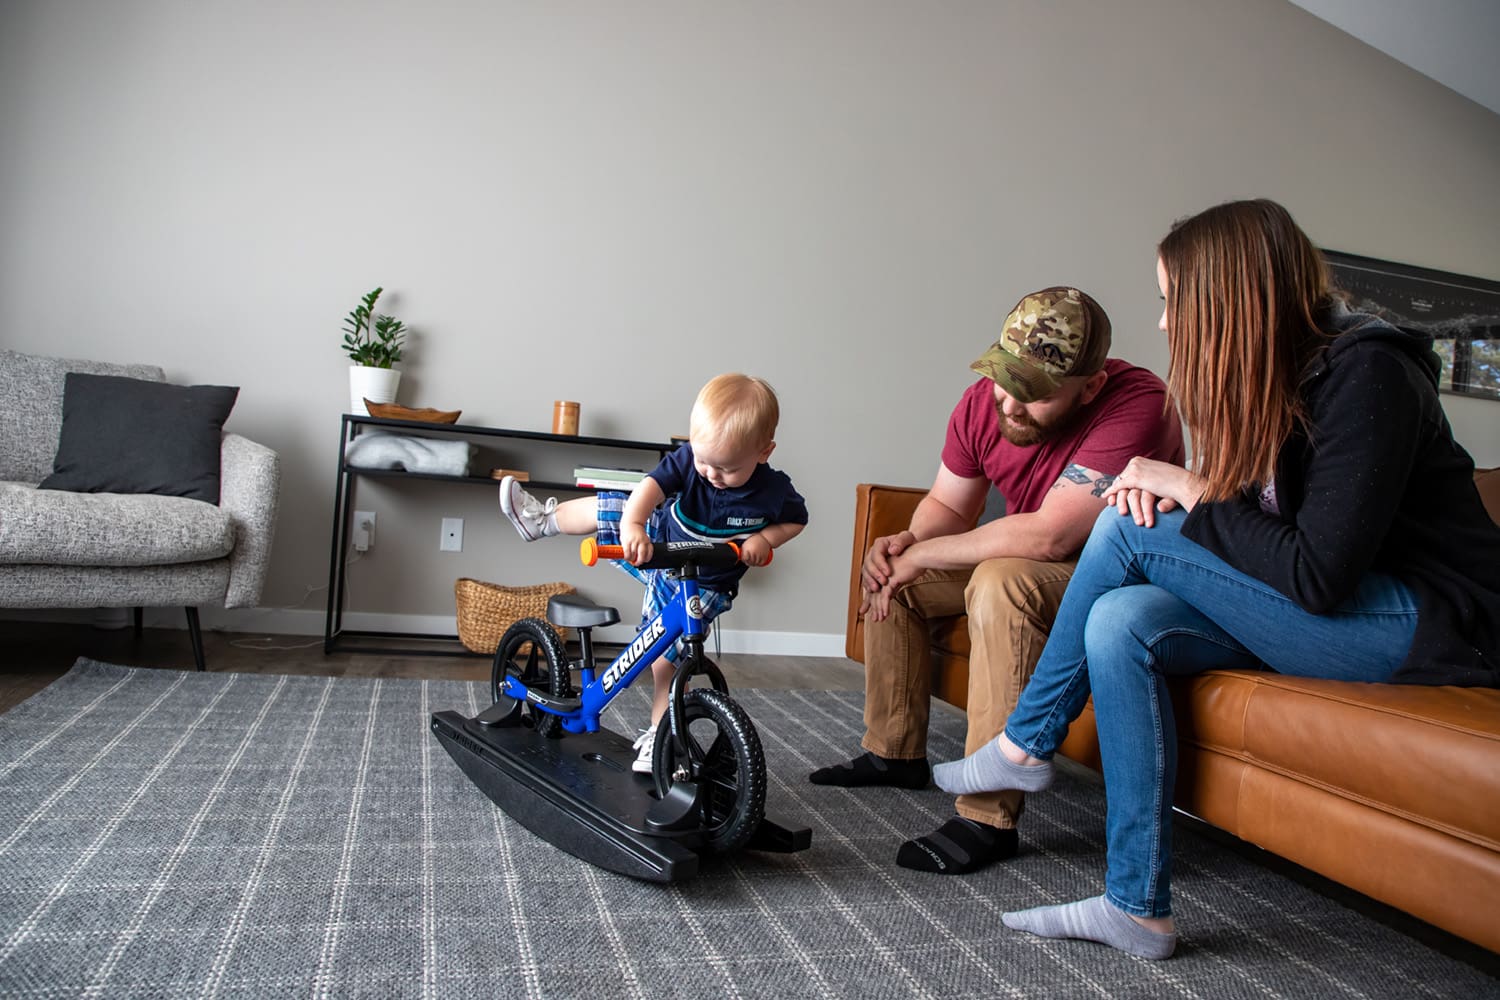 Parents watch from the couch while child plays on blue Strider Sport Rocking Bike